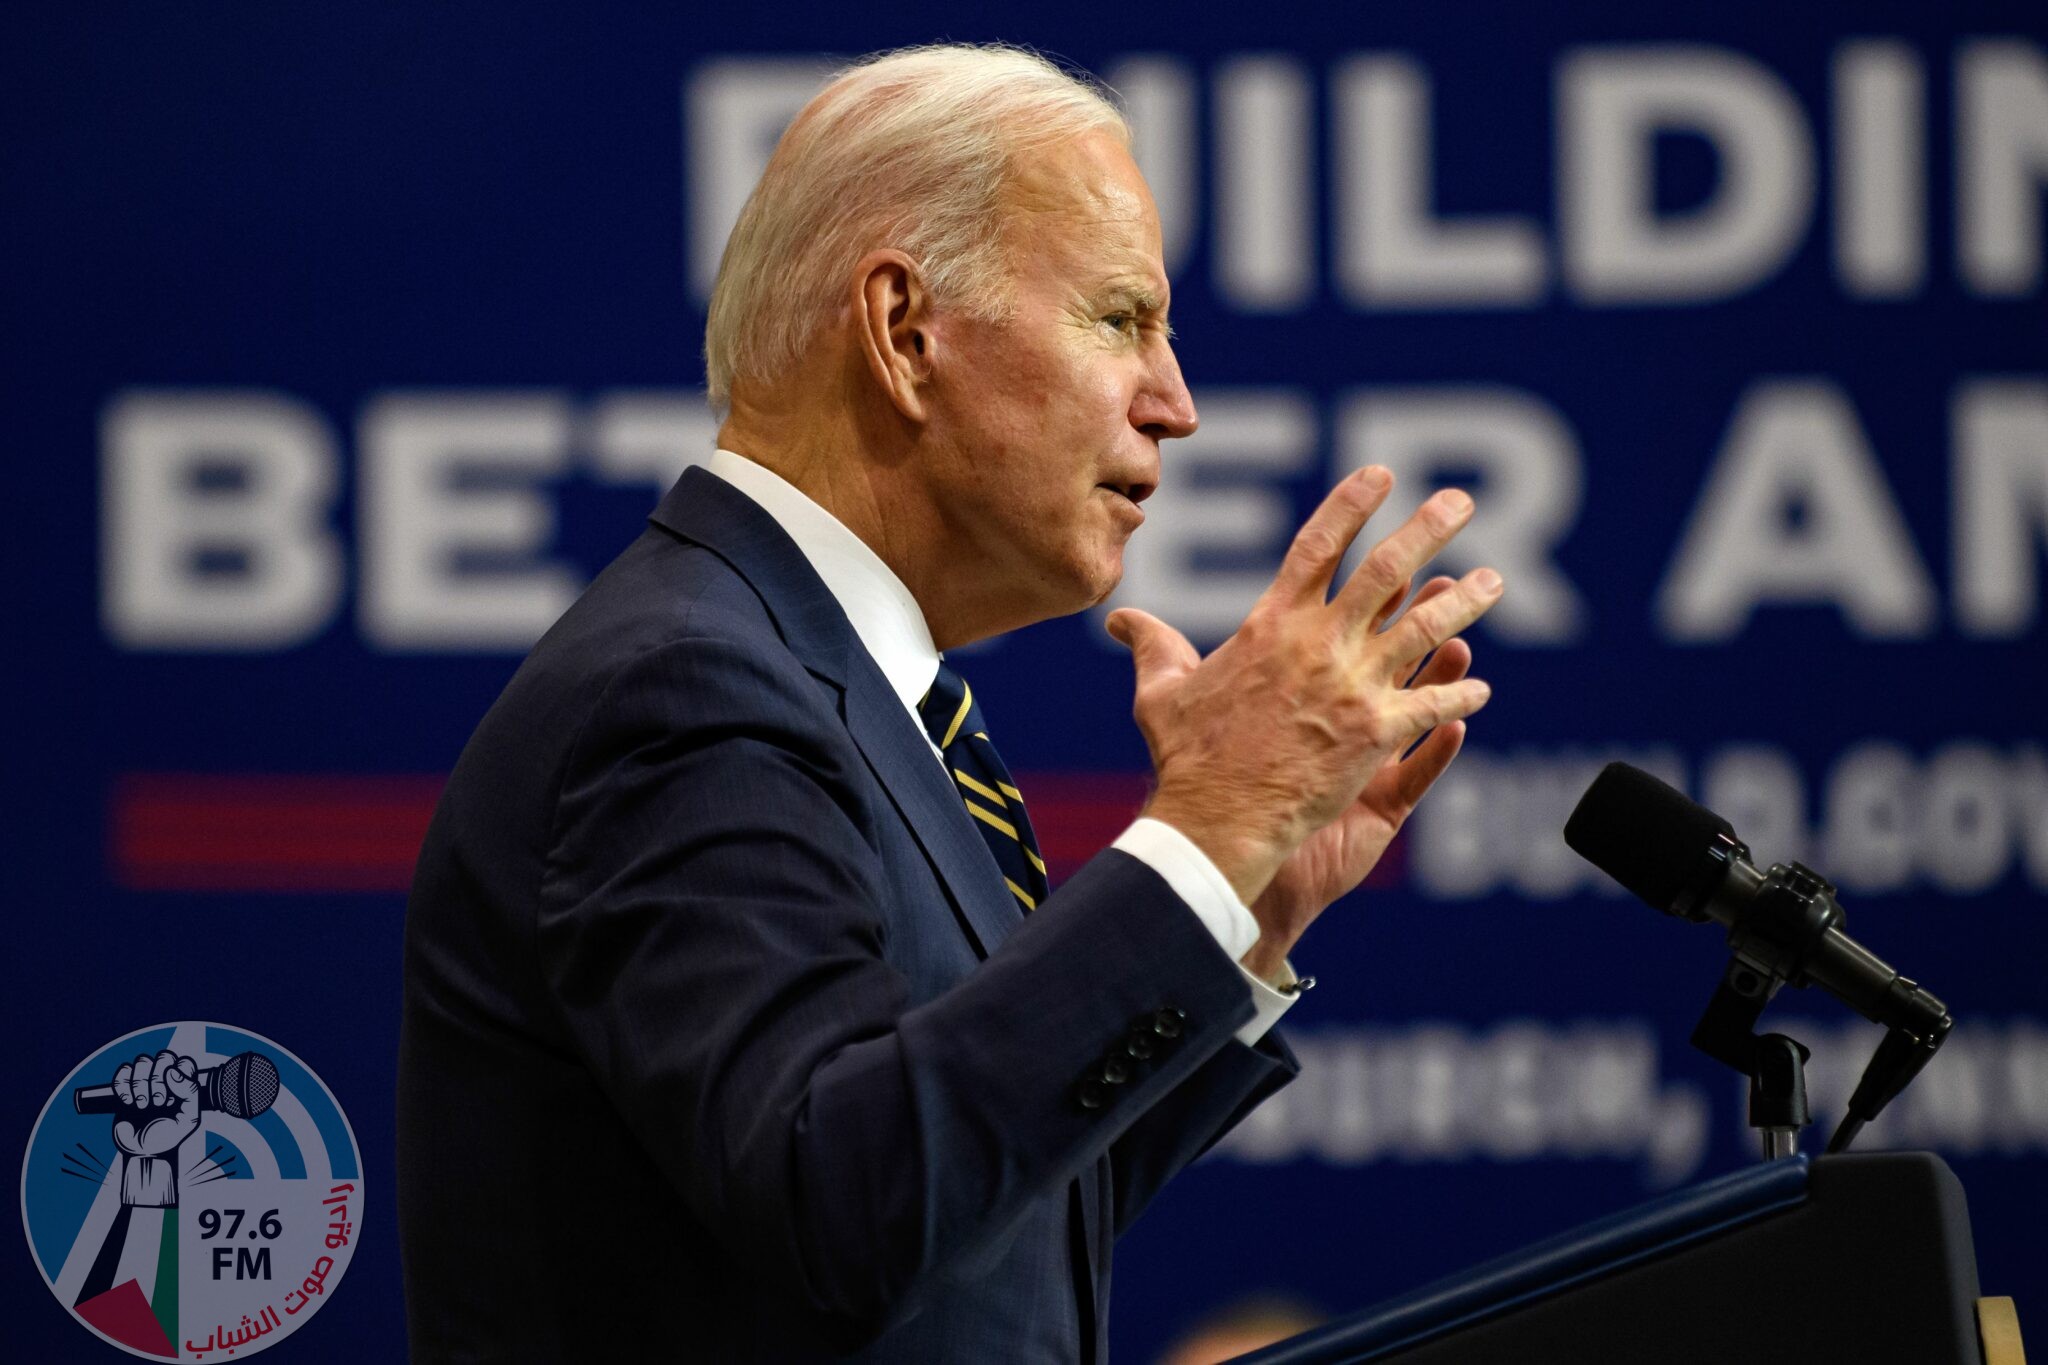 PITTSBURGH, PA - JANUARY 28: U.S. President Joe Biden speaks at Mill 19, a former steel mill being developed into a robotics research facility, on the campus of Carnegie Mellon University on January 28, 2022 in Pittsburgh, Pennsylvania. Biden arrived in Pittsburgh for a scheduled visit to promote his bipartisan infrastructure plan hours after at least 10 people were reportedly injured when a major bridge collapsed in the city. Jeff Swensen/Getty Images/AFP
== FOR NEWSPAPERS, INTERNET, TELCOS & TELEVISION USE ONLY ==